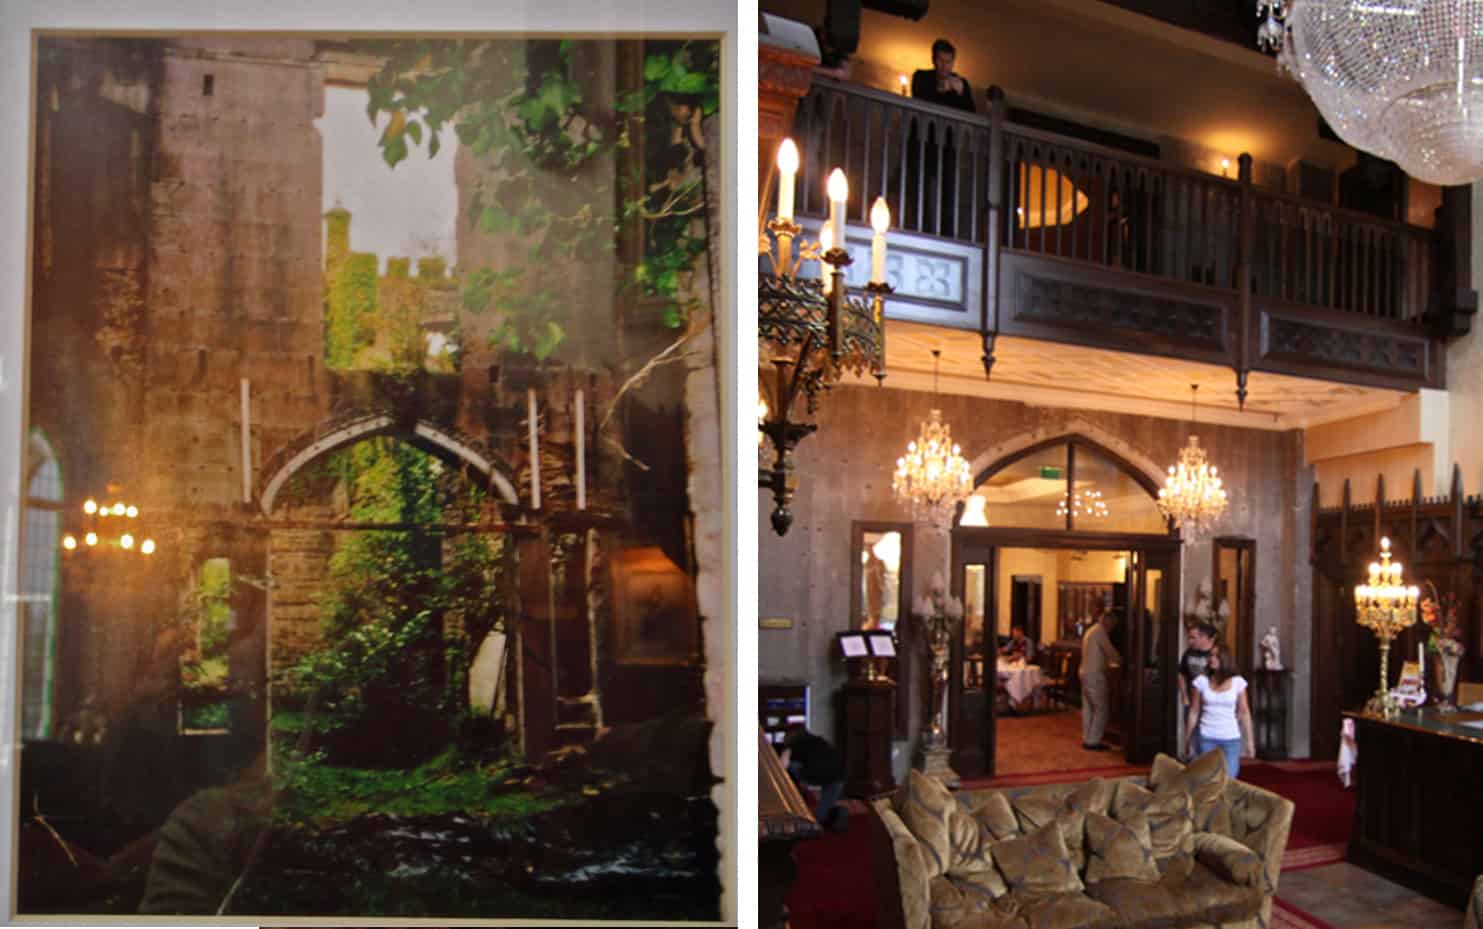 Photograph on left shows the castle in ruins, and on the right the restored reception area.